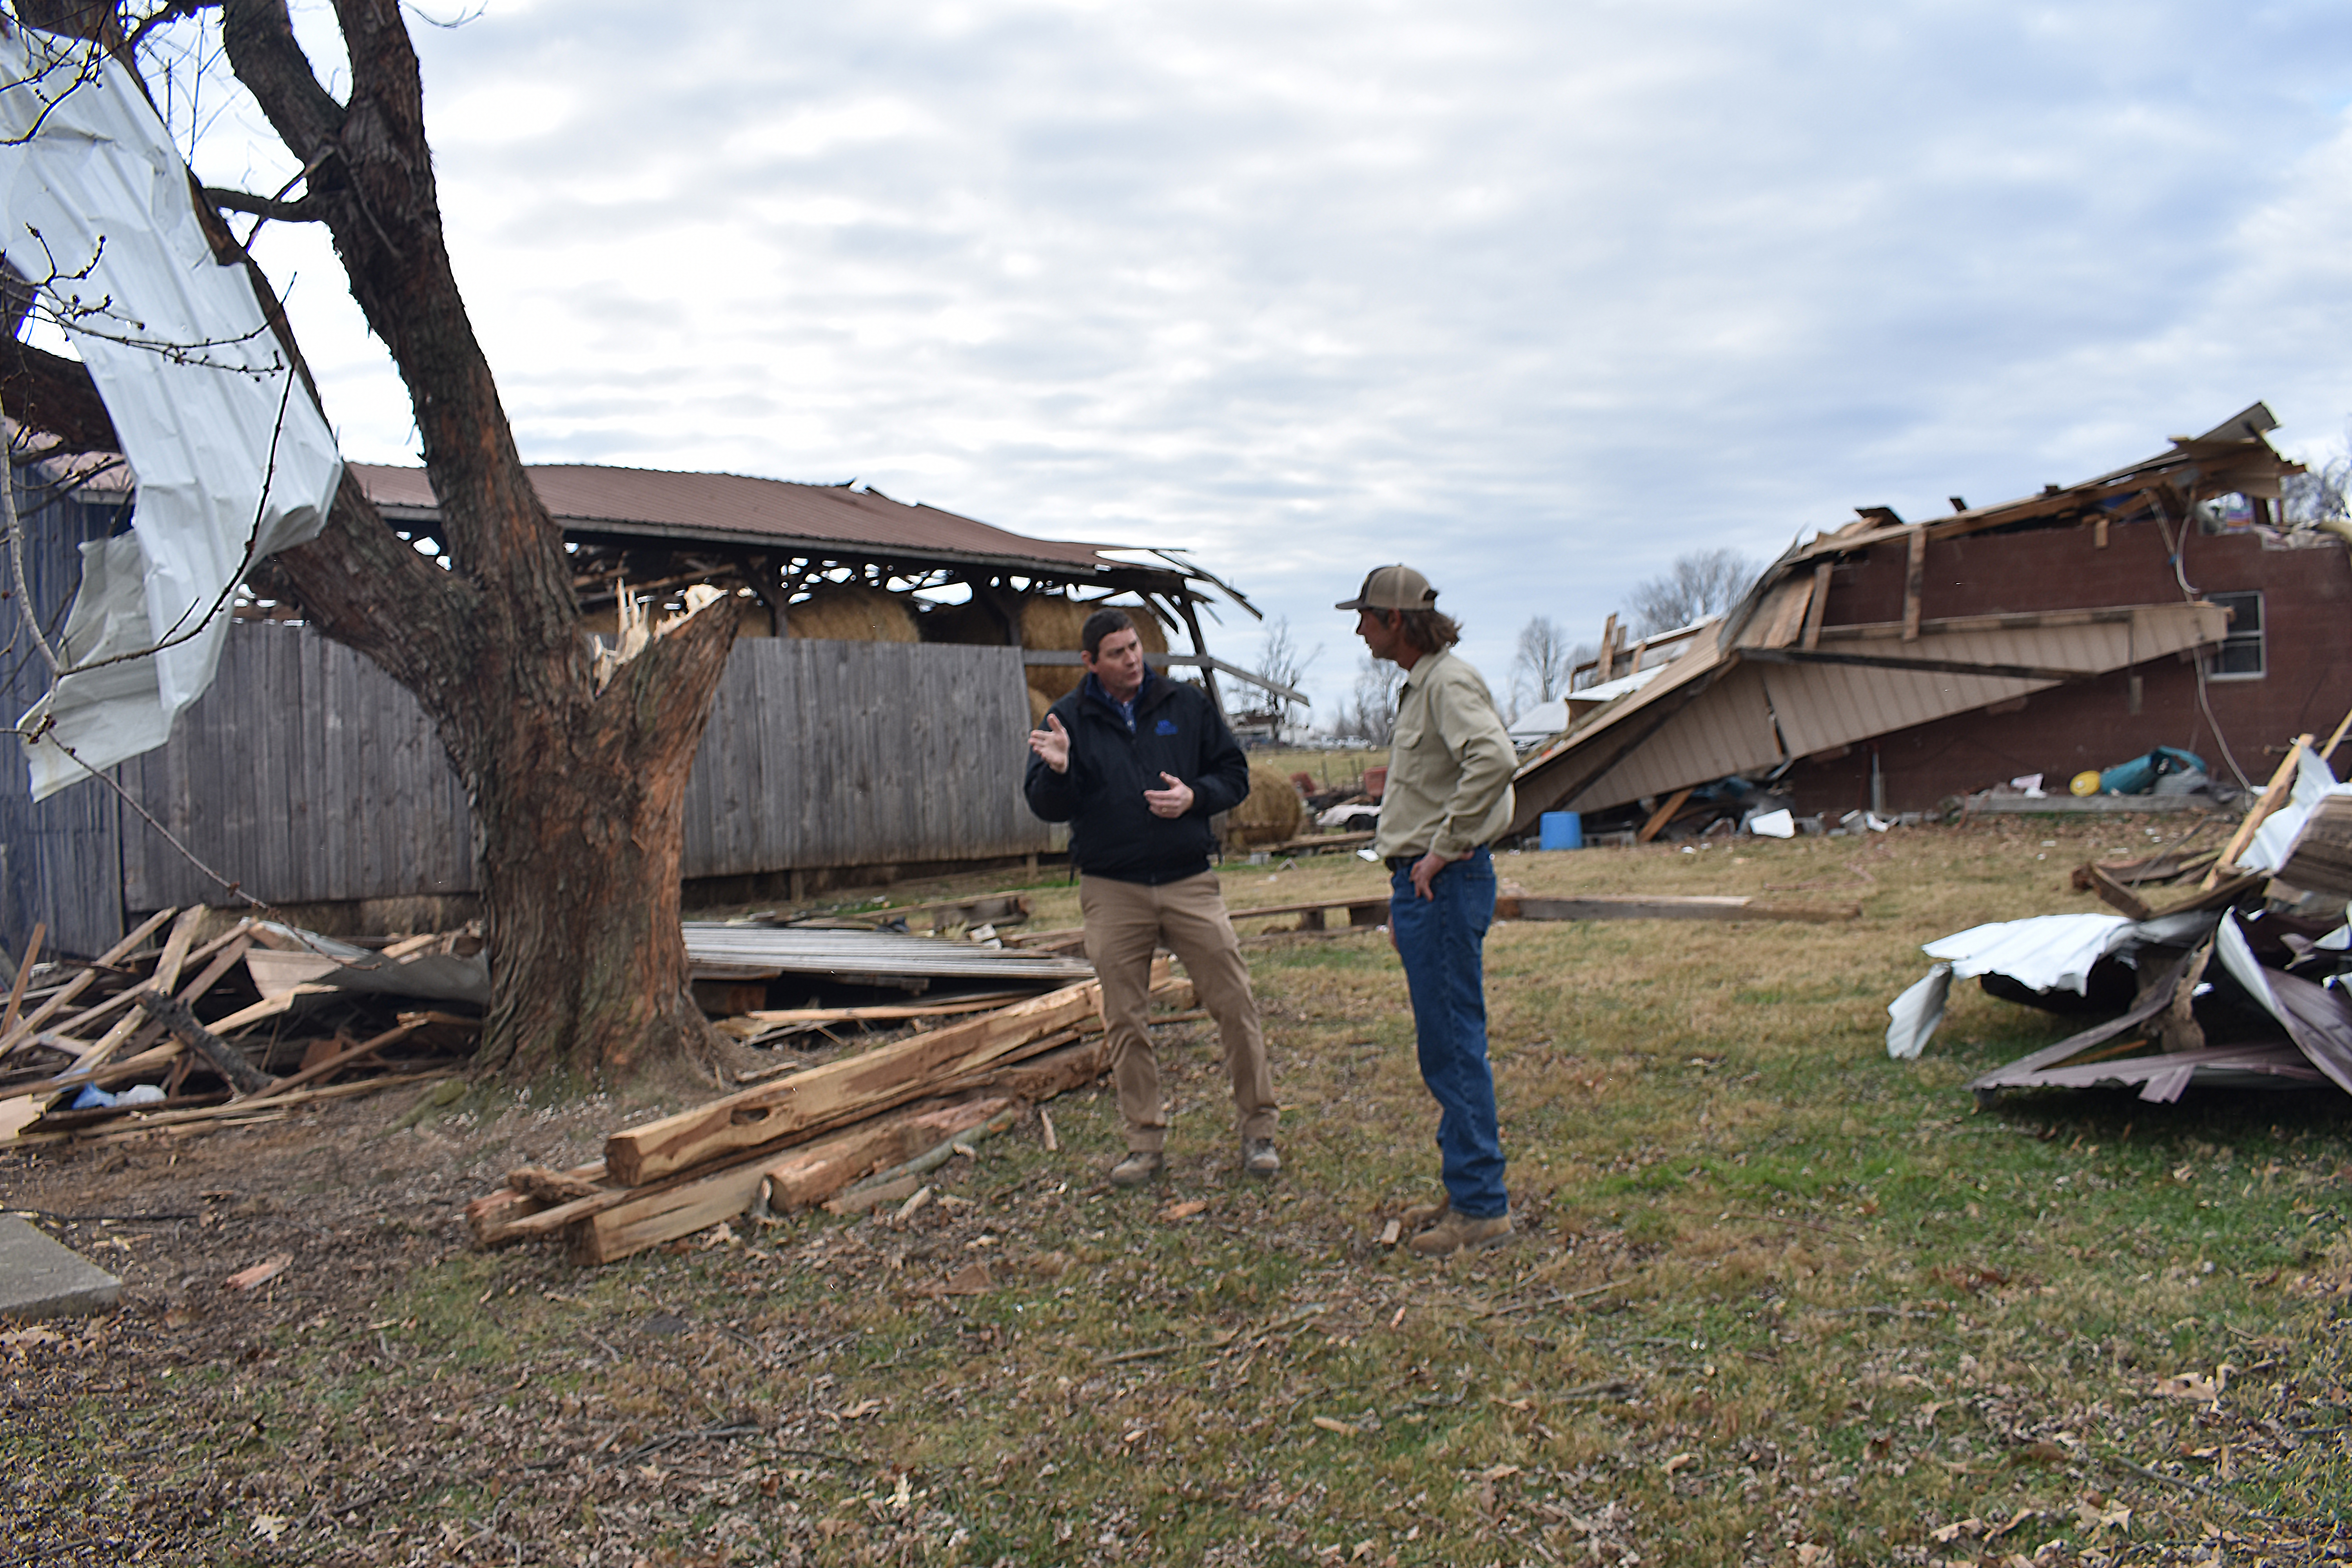 Darrell Simpson, Muhlenberg County agriculture and natural resources extension agent, speaks with Bremen farmer Kenny Smith about the tornado damage to Smith's property. Photo by Katie Pratt, UK agricultural communications.